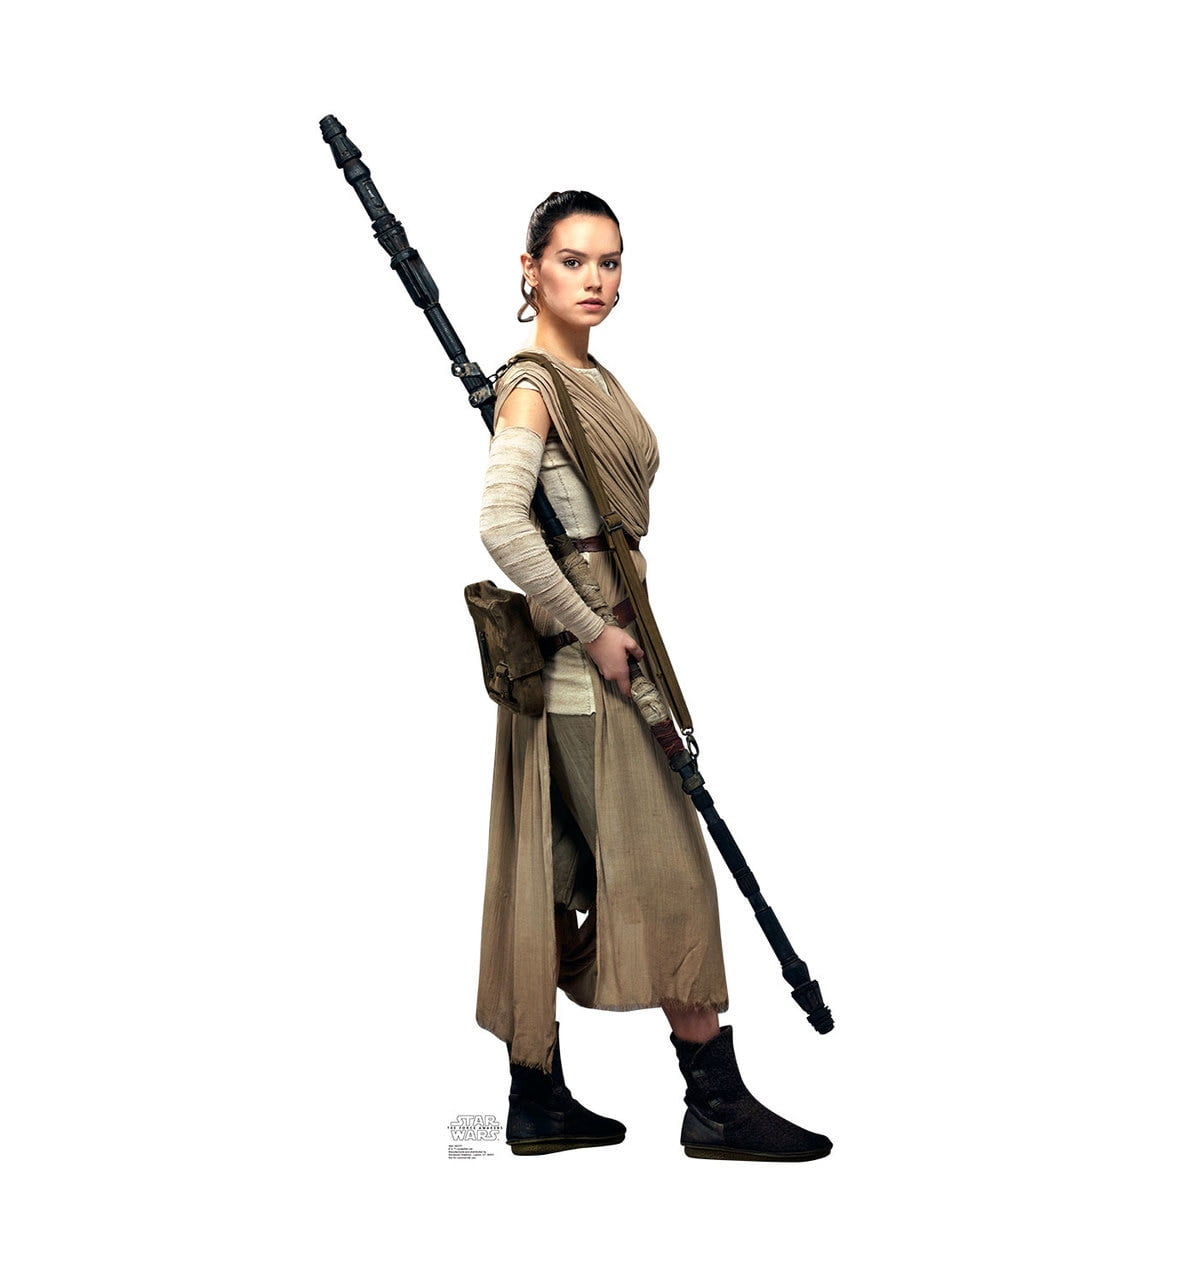 Picture of Advanced Graphics 2041 73 x 36 in. Rey Cardboard Cutout, Star Wars VII - The Force Awakens